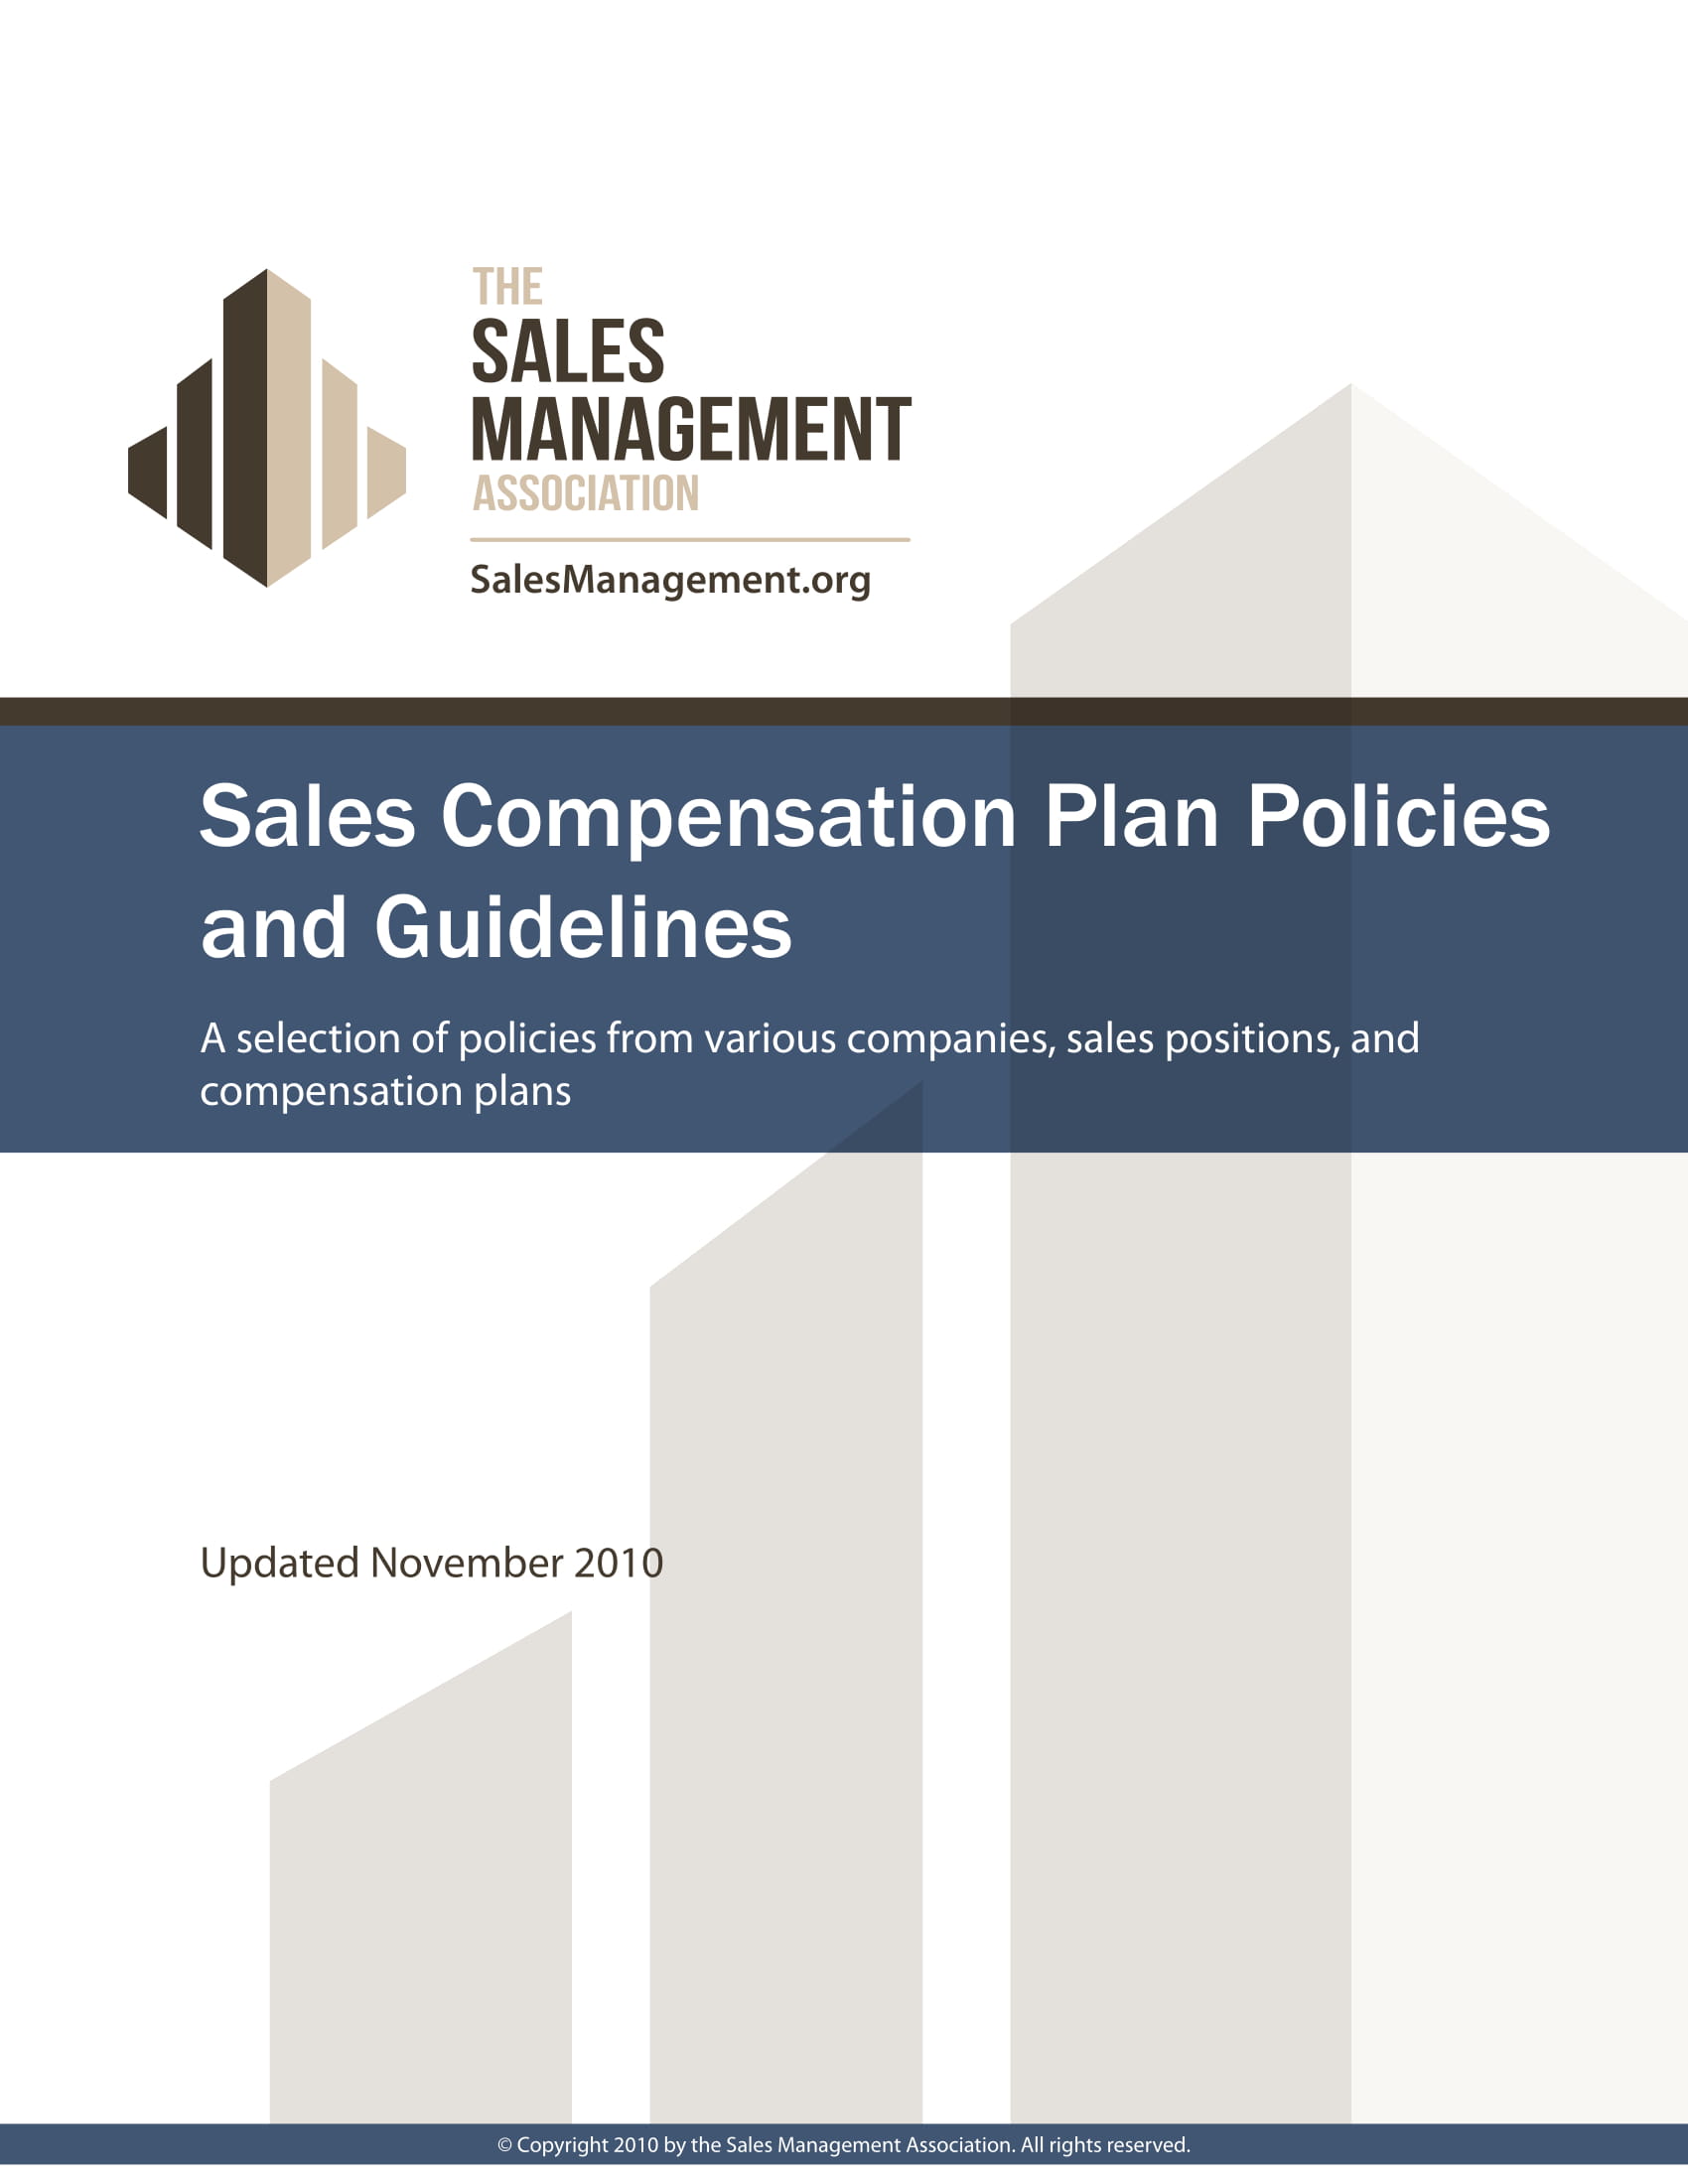 Sales Compensation Plan Template 14+ Examples, Format, Pdf Examples